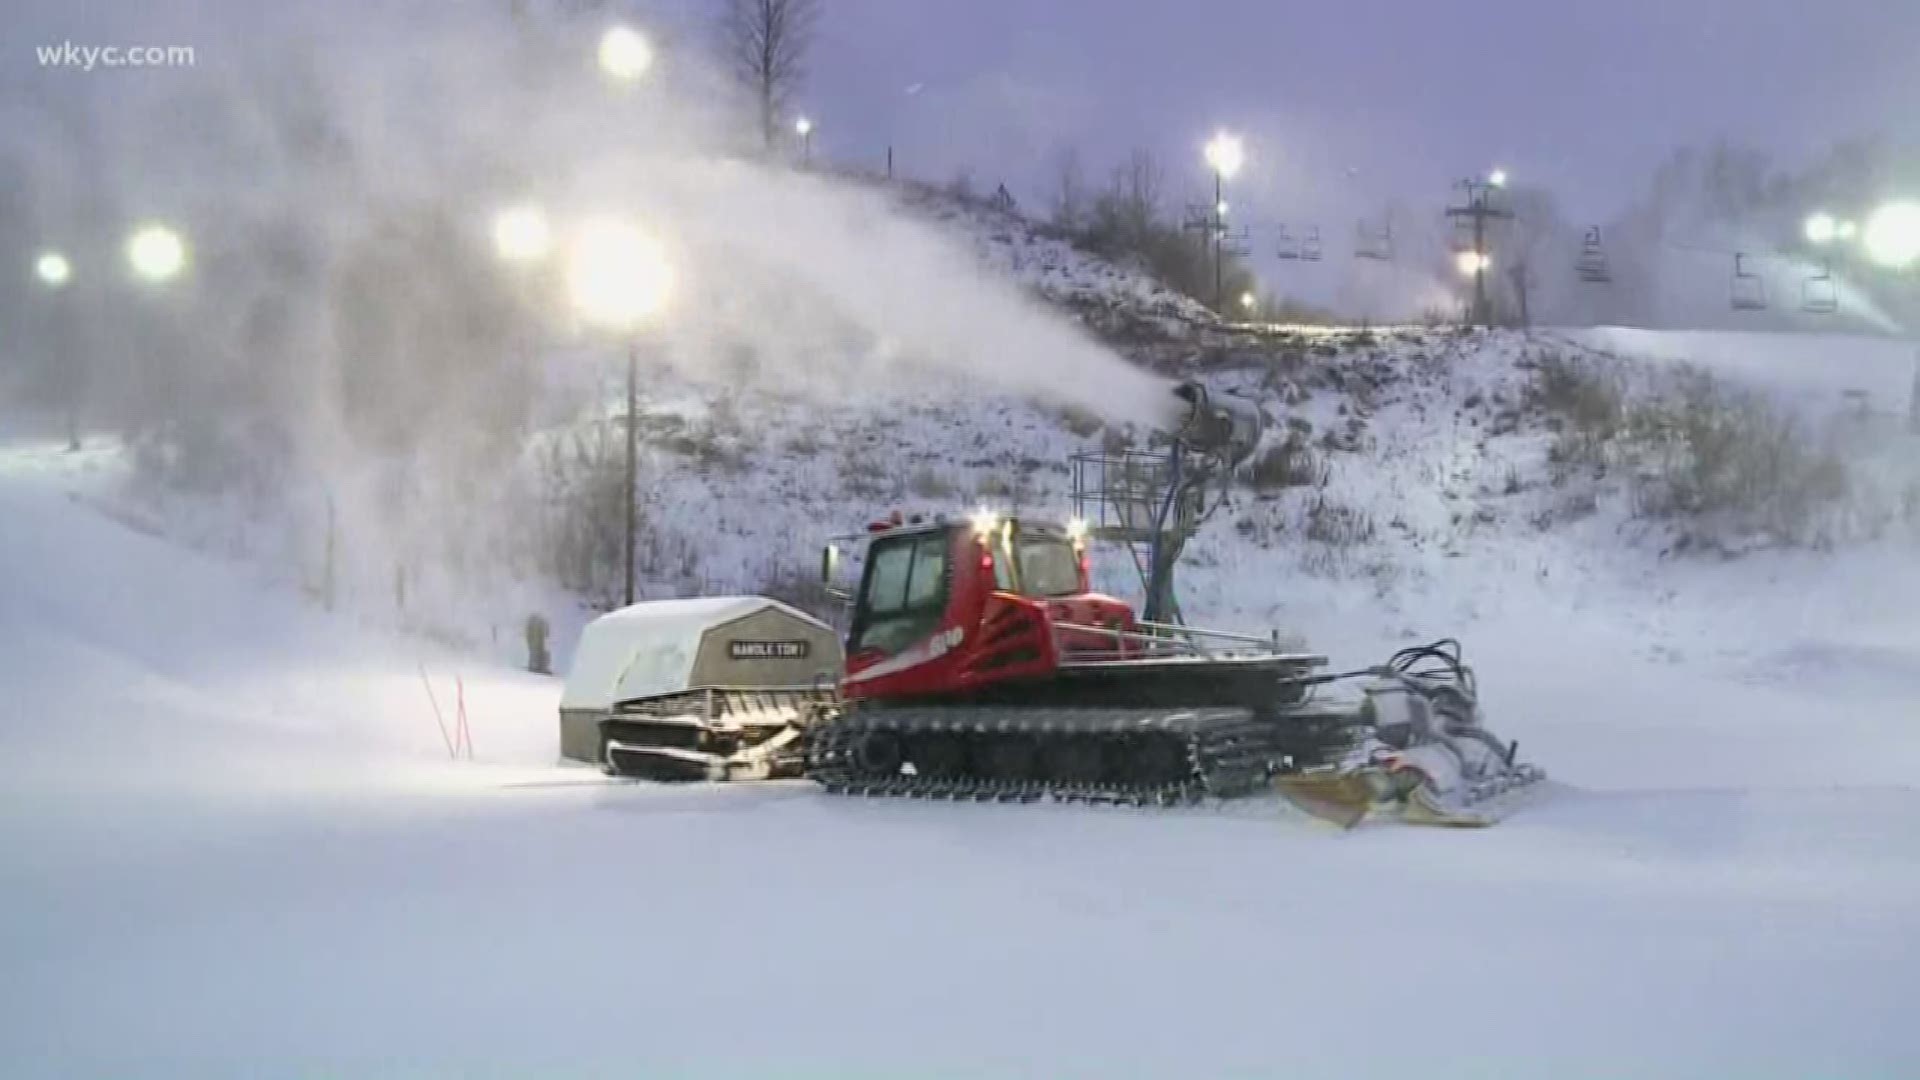 Jan. 19, 2020: The folks at Boston Mills/Brandywine ski resorts are taking advantage of all this cold weather by firing up their snow machines.